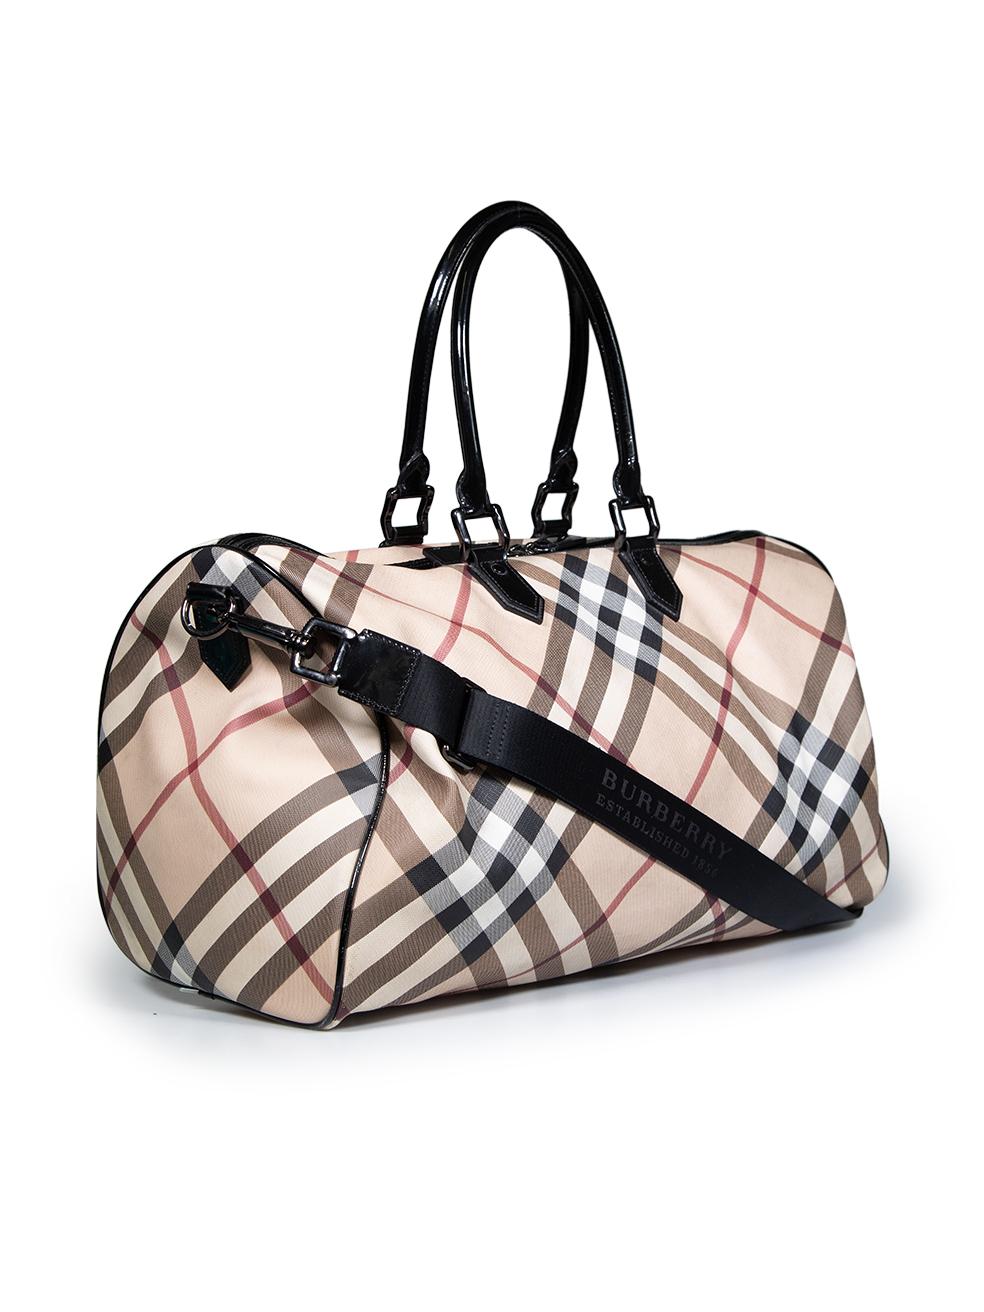 CONDITION is Good. Minor wear to the bag is evident. Light discolouration to the front, back and both sides. Small tarnishing to general hardware on this used Burberry designer resale item.
 
 
 
 Details
 
 
 Beige
 
 Canvas
 
 Large duffle bag
 
